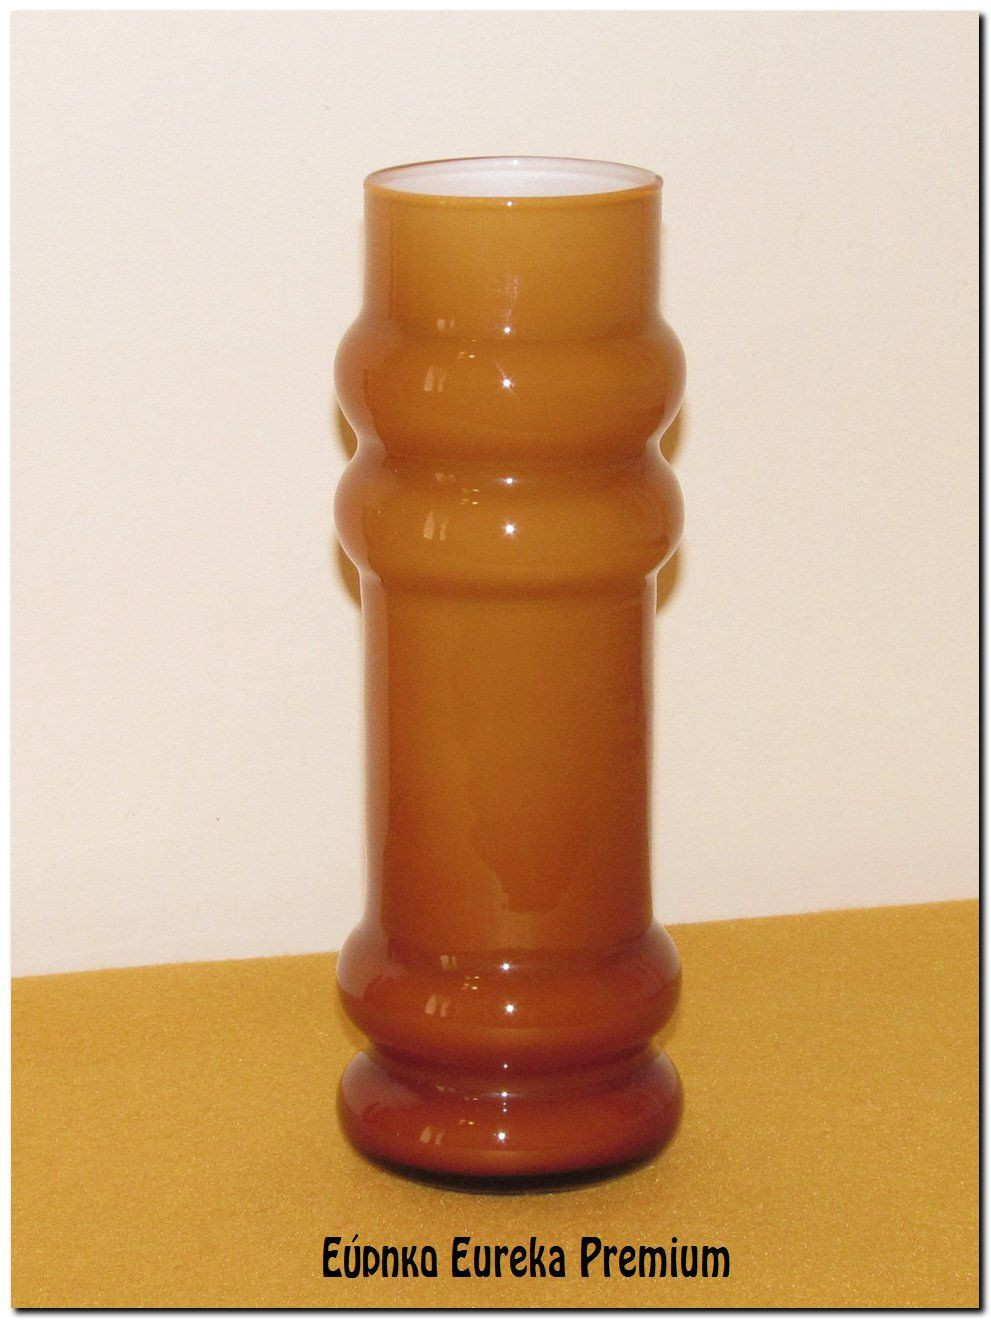 brody co glass vase of vintage colored glass vase image antique glass living room crystal regarding vintage colored glass vase gallery vintage cased glass vase in sweet caramel honey color from of